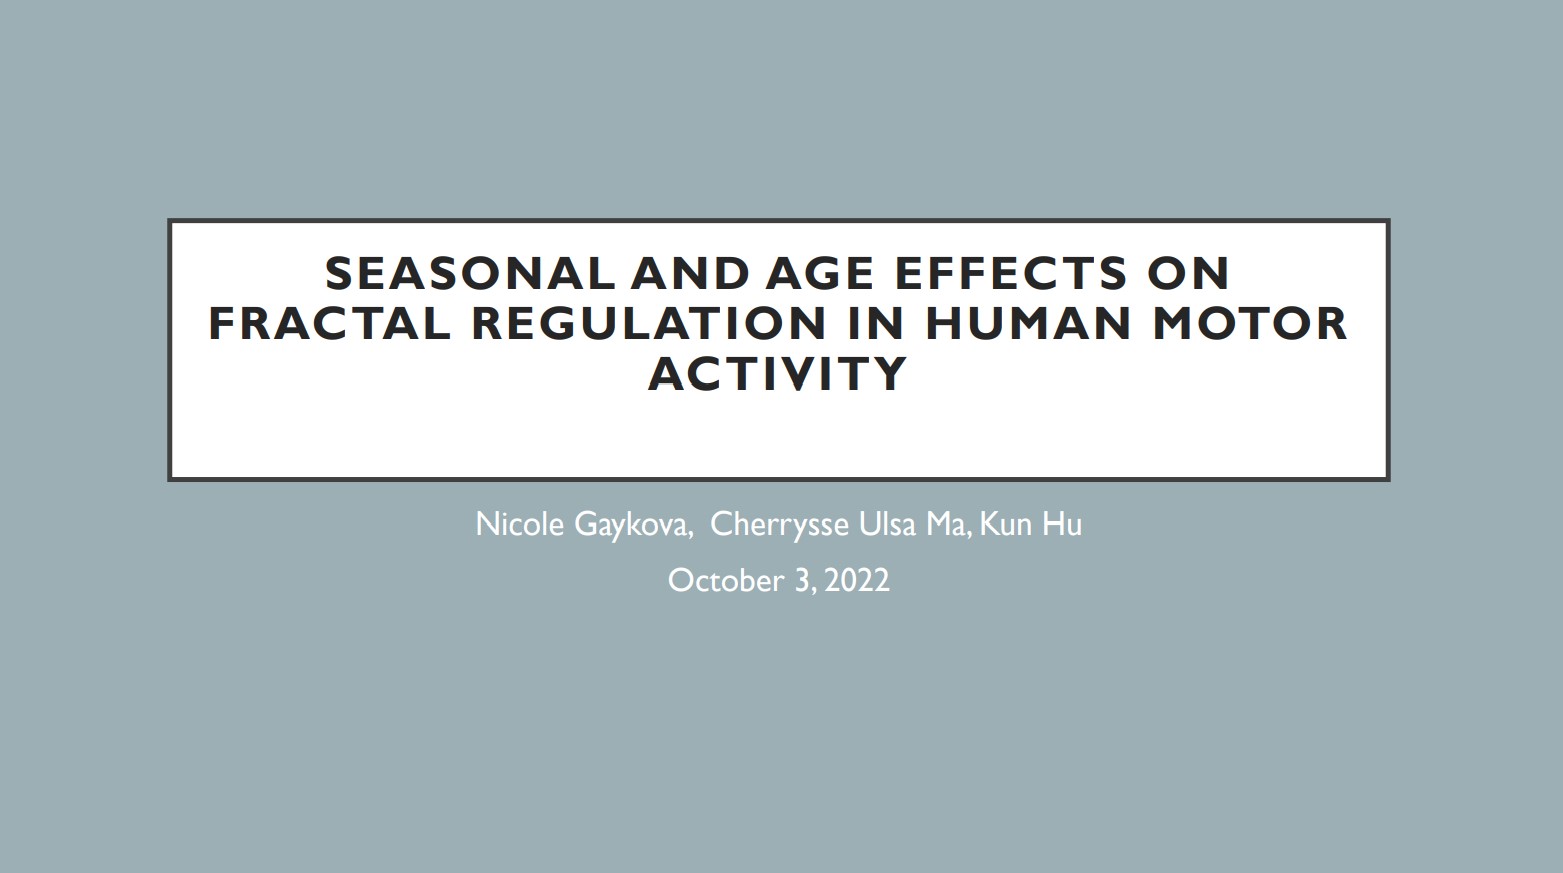 Seasonal and age effects on fractal regulation in human motor activity